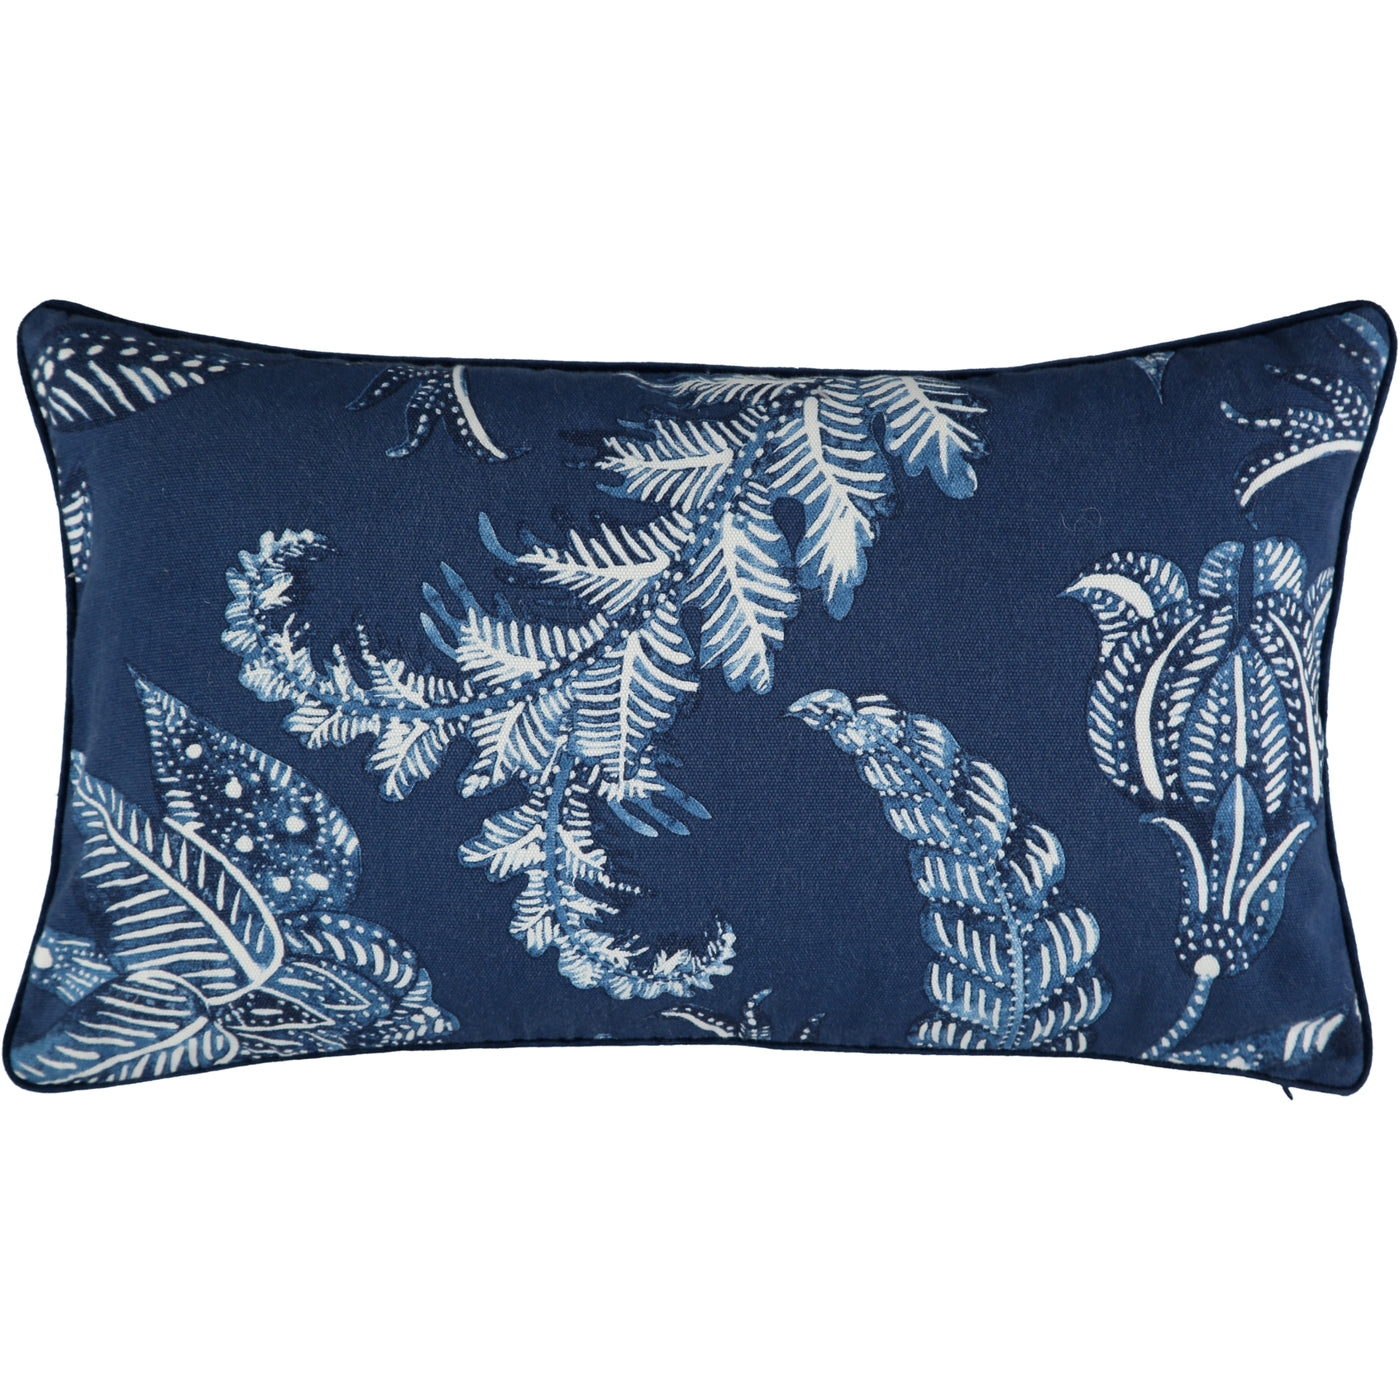 Kitty-Holmes-Navy-and-white-cushion-cover-with-white-batik-flowers